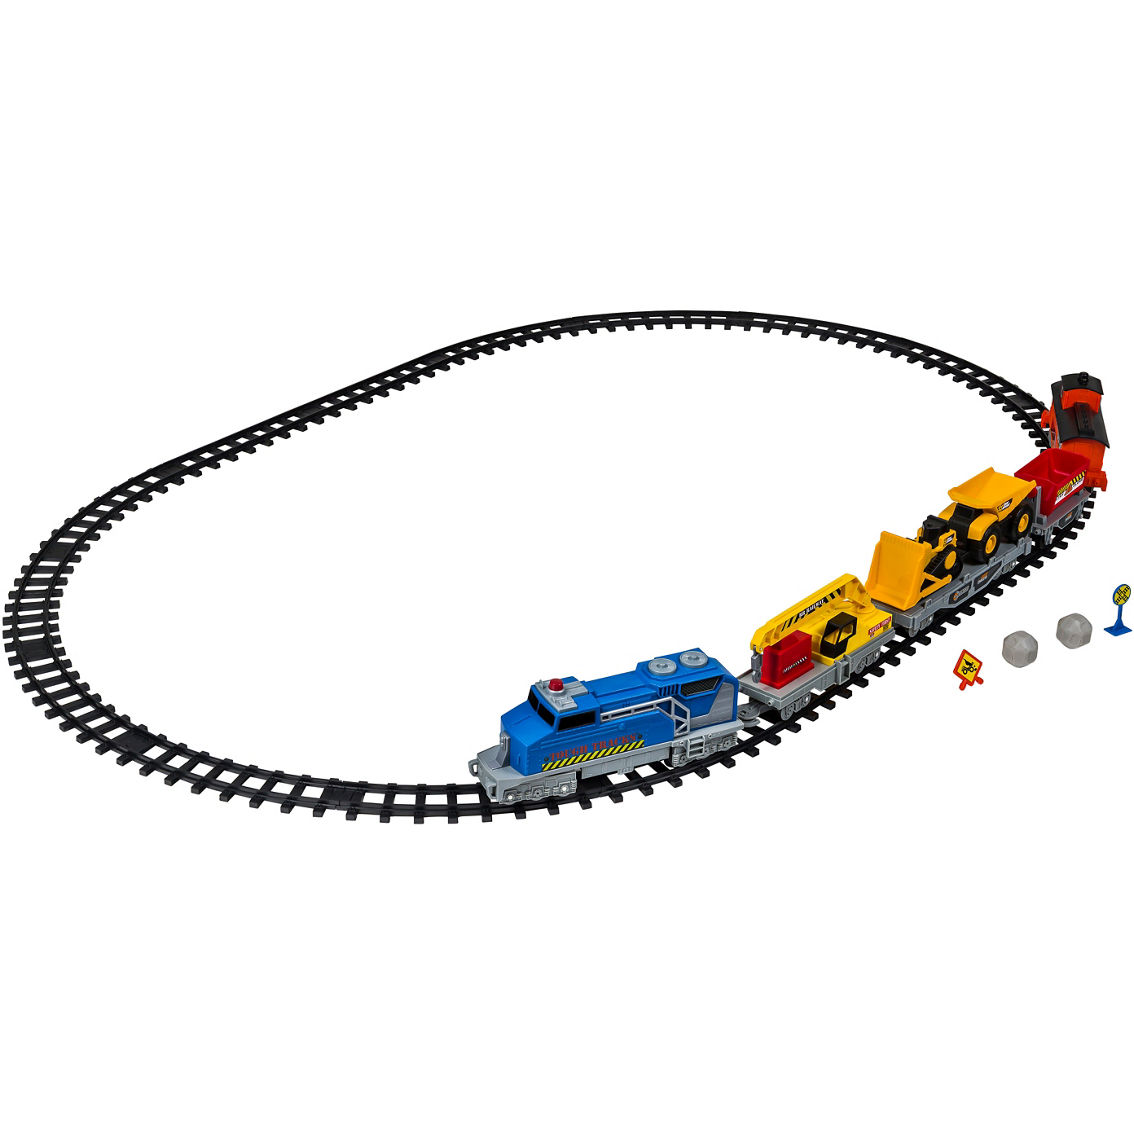 Road Rippers Tough Tracks Train - Image 2 of 2